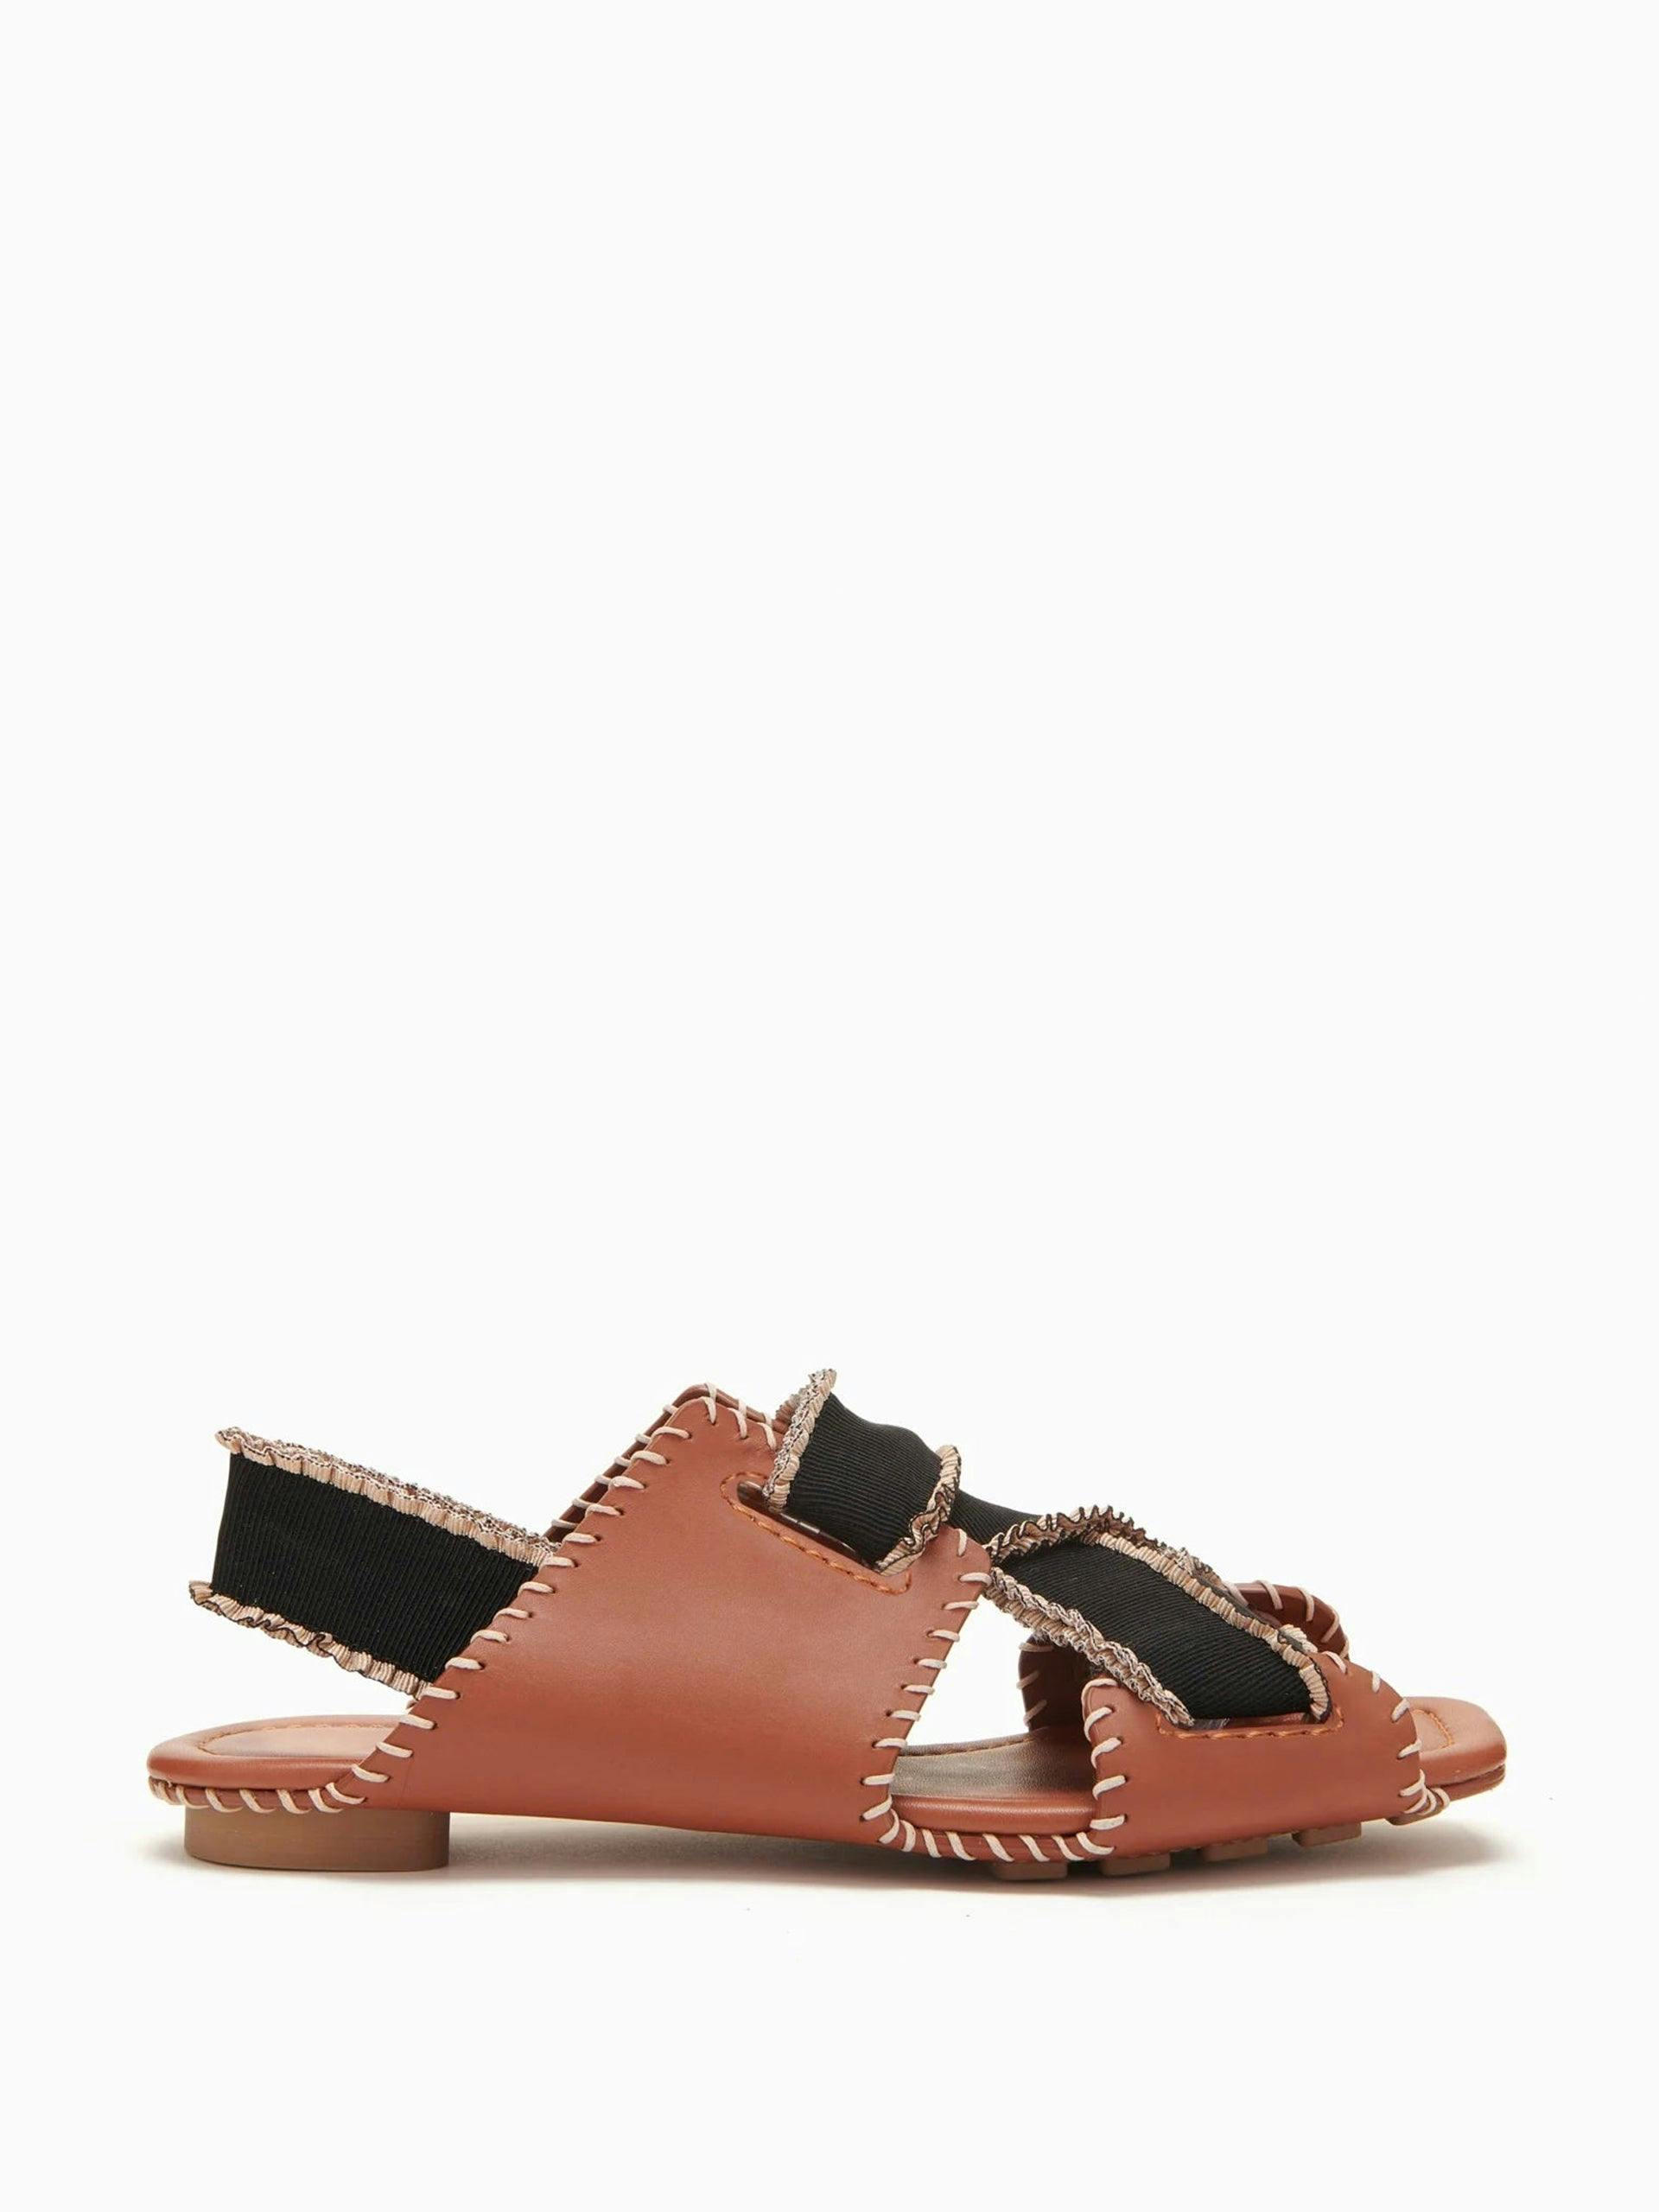 Brown leather elastic-strap sandals with contrast stitching